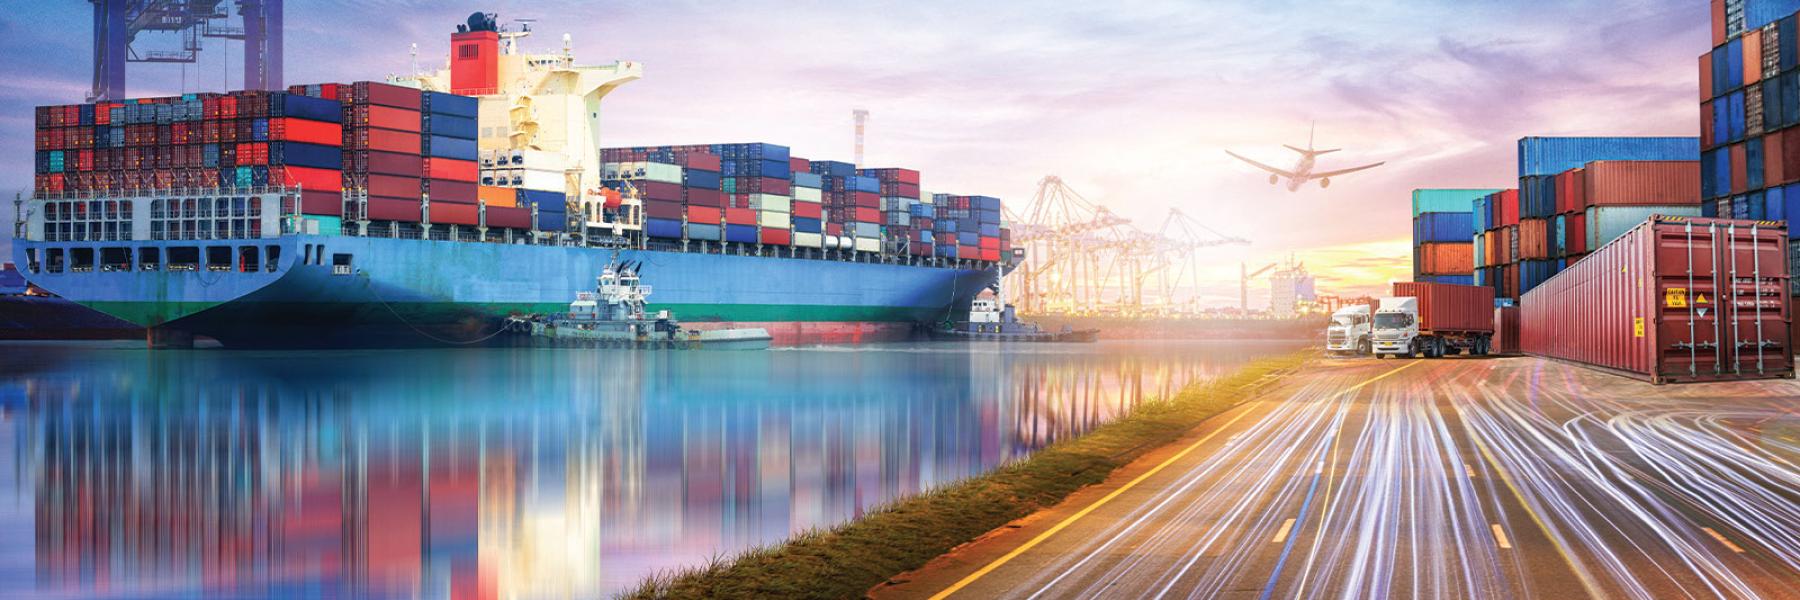 Shipping containers and carriers